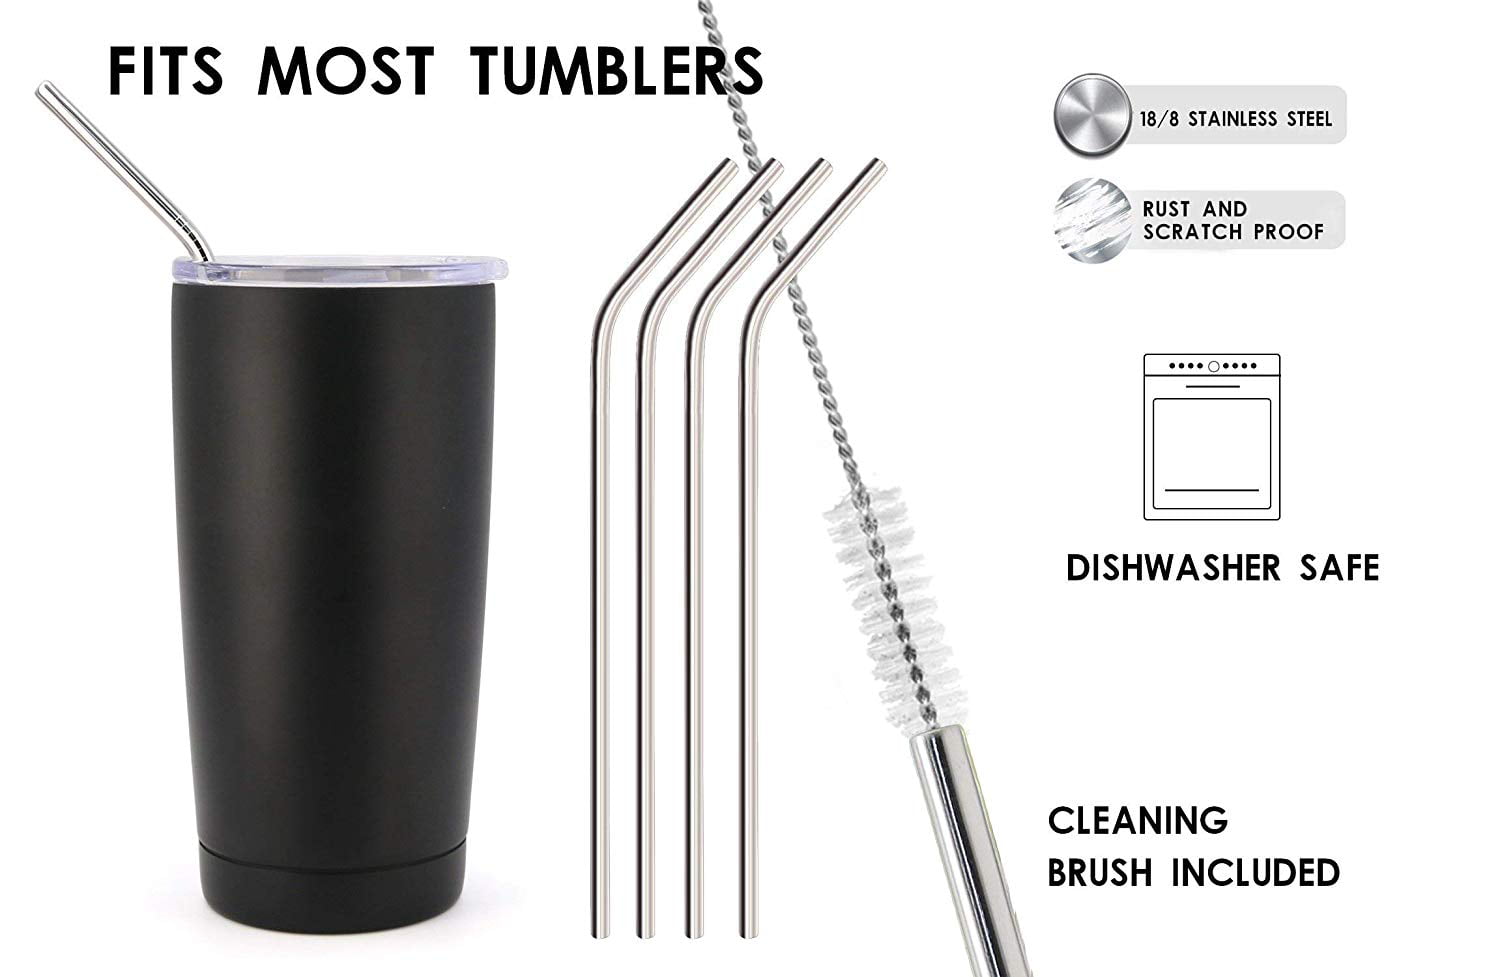  8 Piece 5/16 inch (8mm) Wide Stainless Steel Straws for 40 oz  Tumbler with Handle, 12 Inch Long Reusable Metal Drinking Straws,  Replacement Straws with Silicone Tips & Cleaning Brush, Silver 